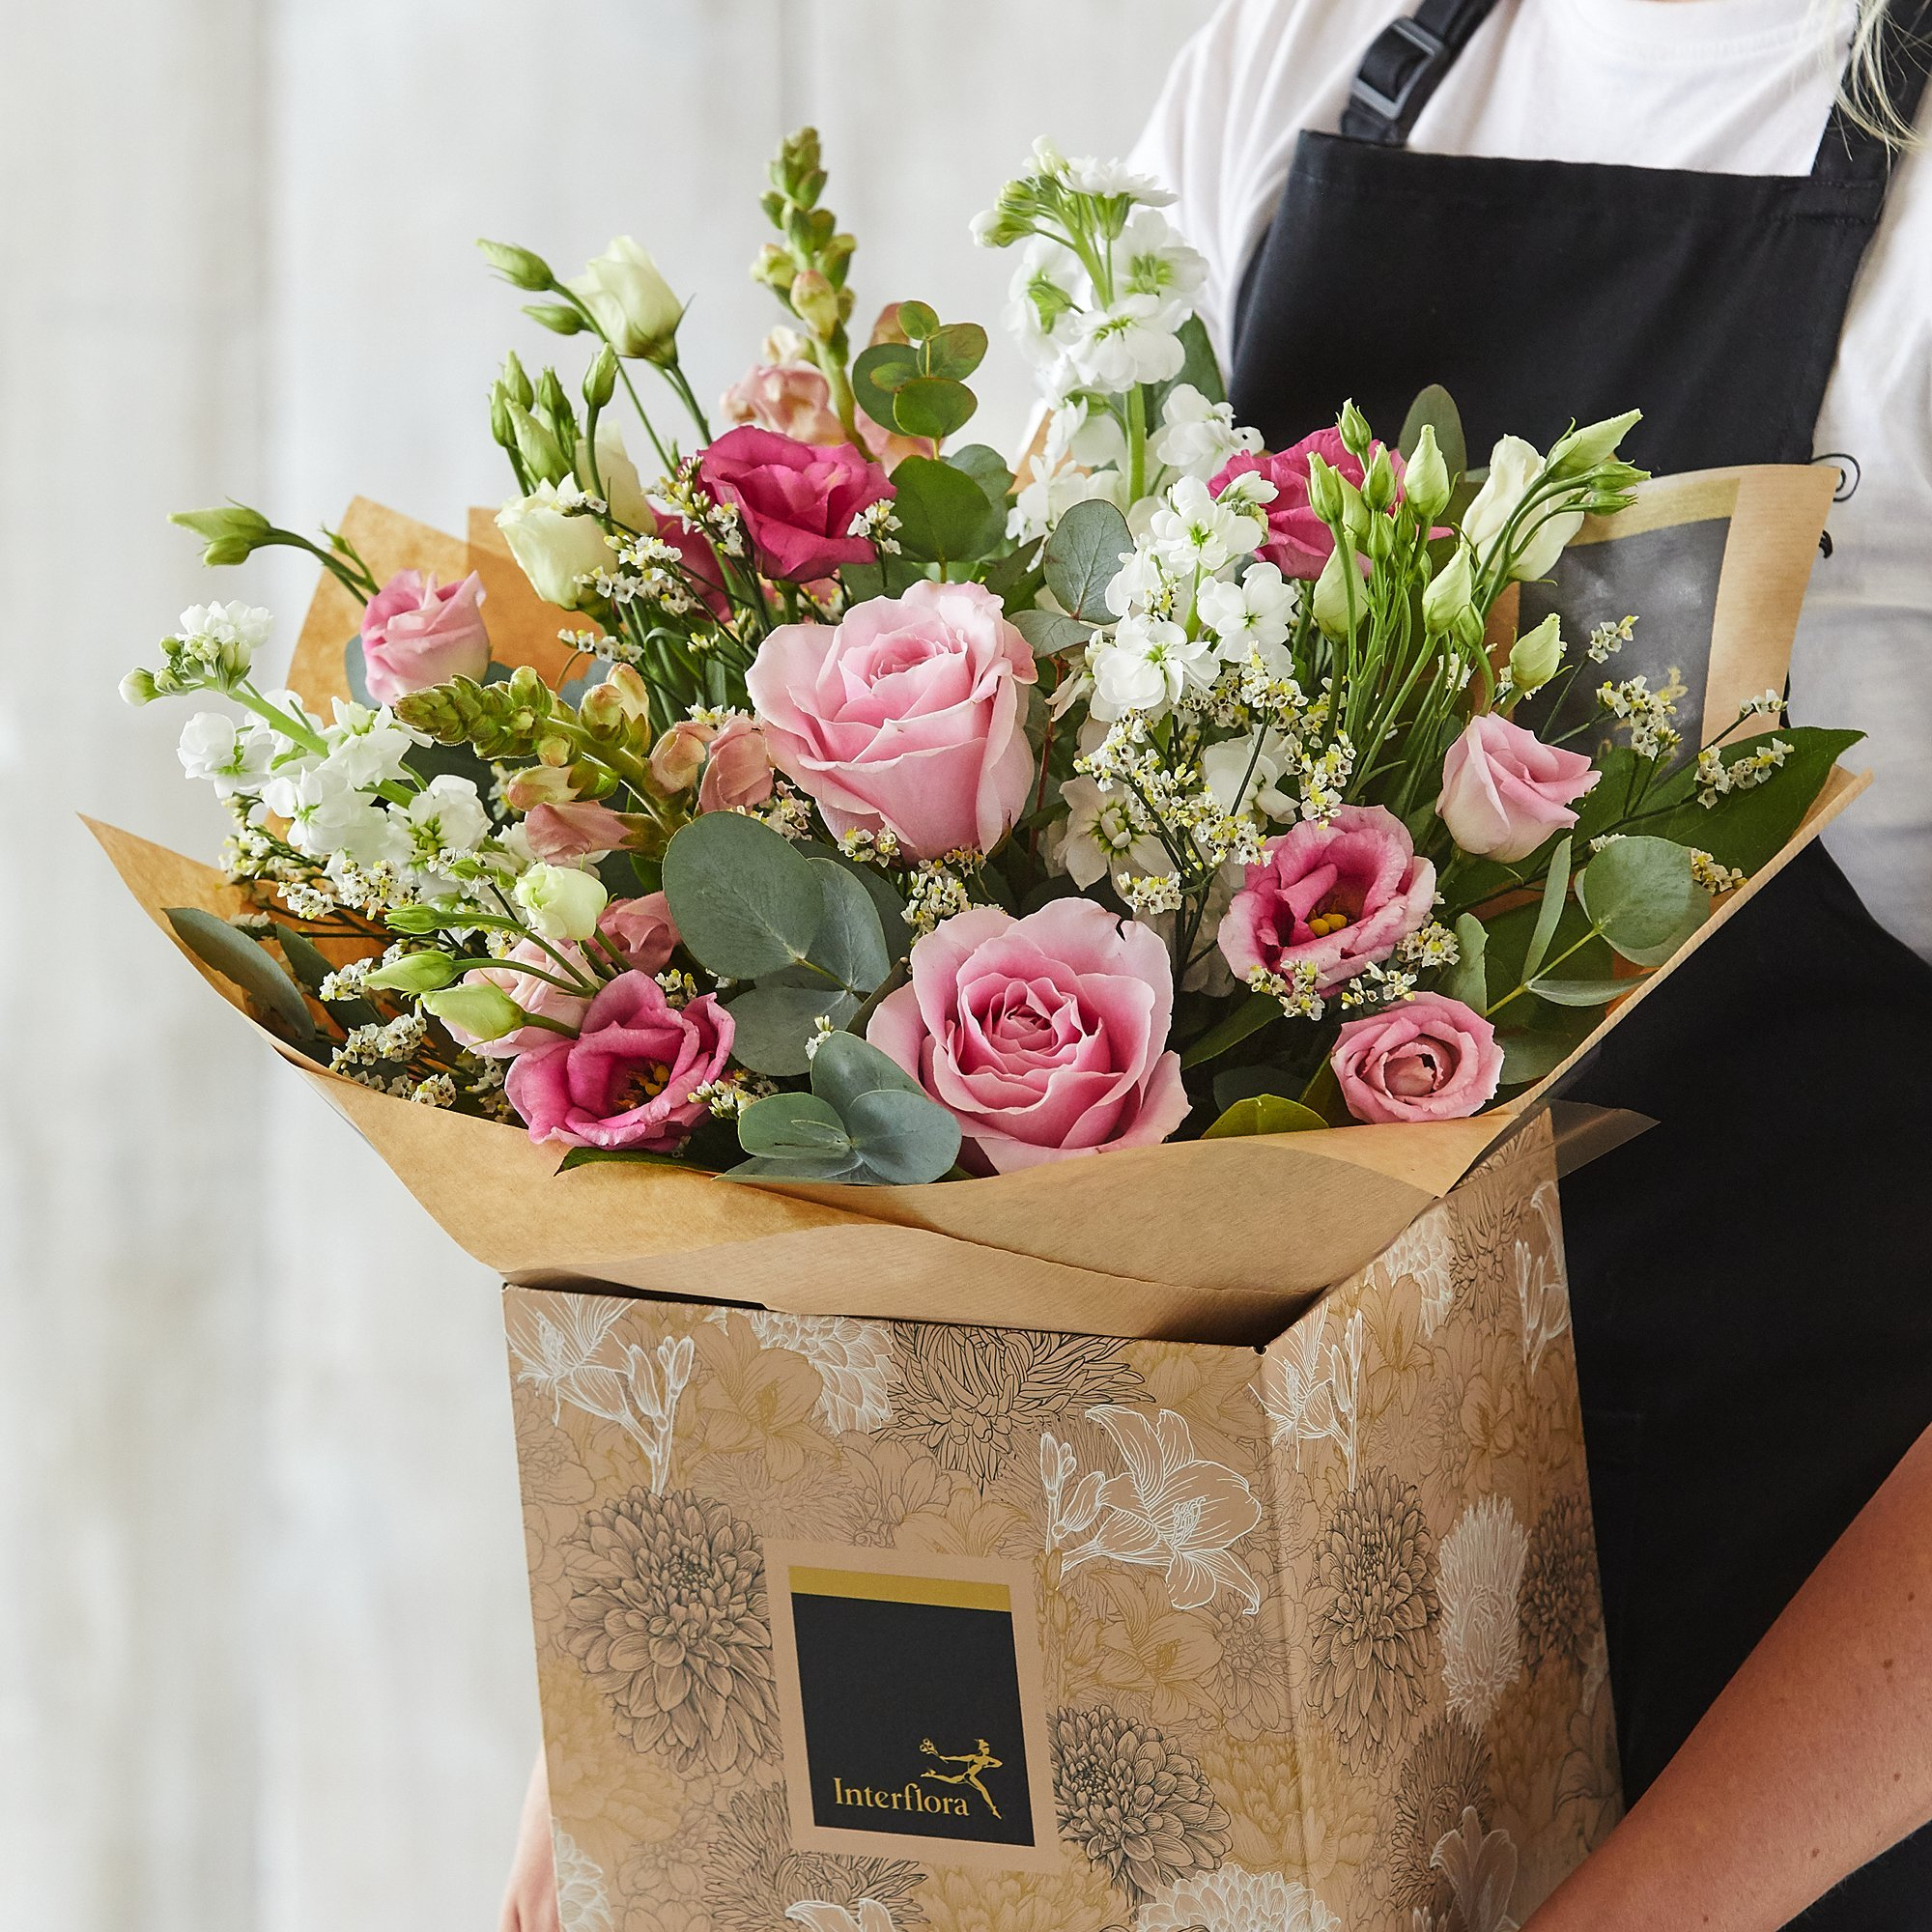 Surprise Me Handcrafted Thinking of You Bouquet - Interflora | Interflora